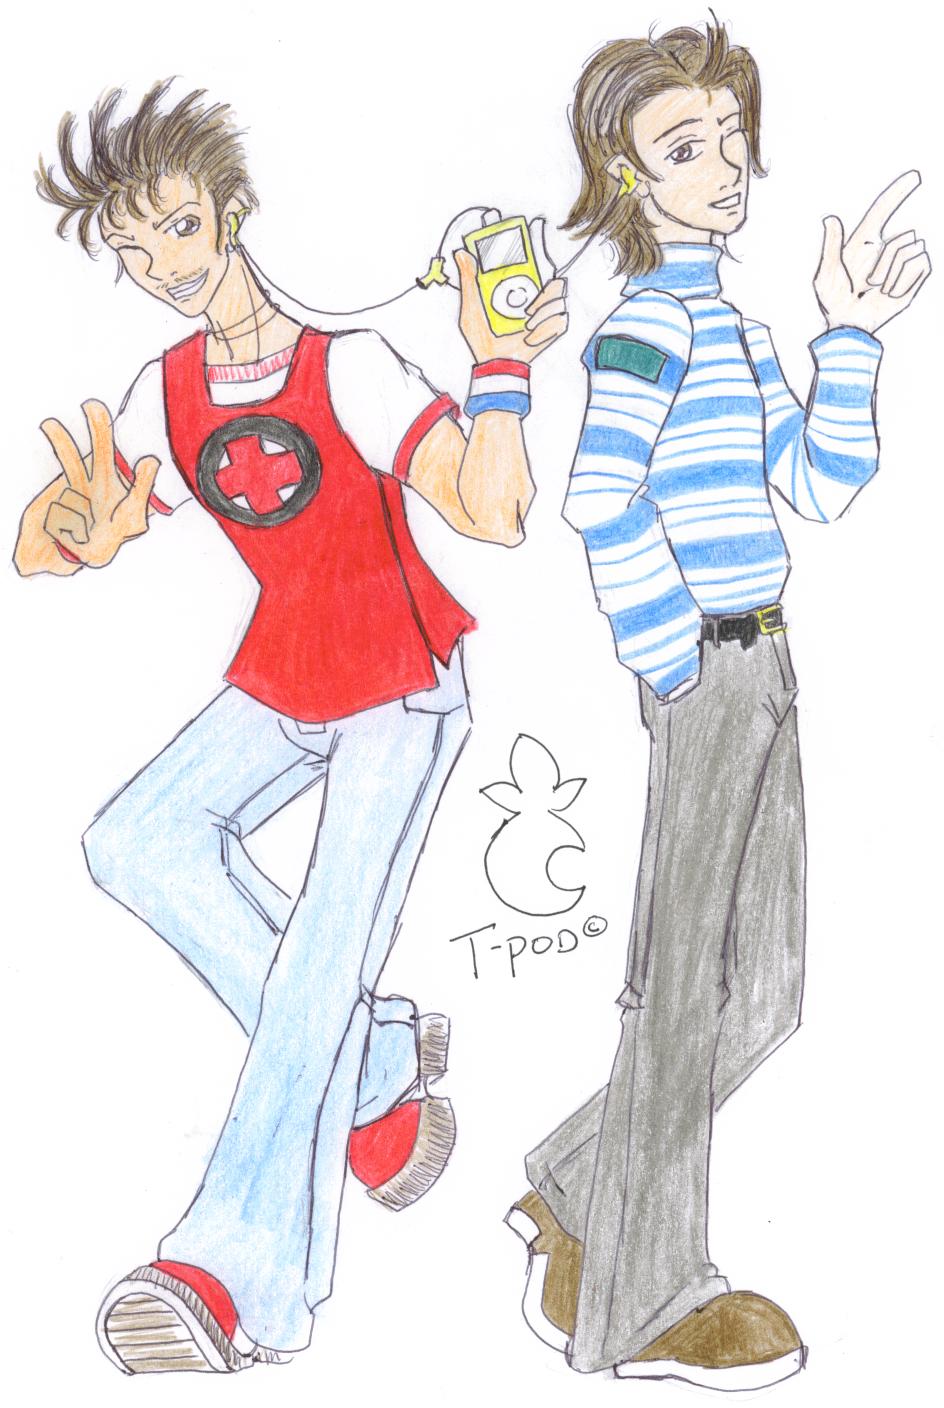 Mas and Menos T-Pod ad colored! by Purely_coincidental